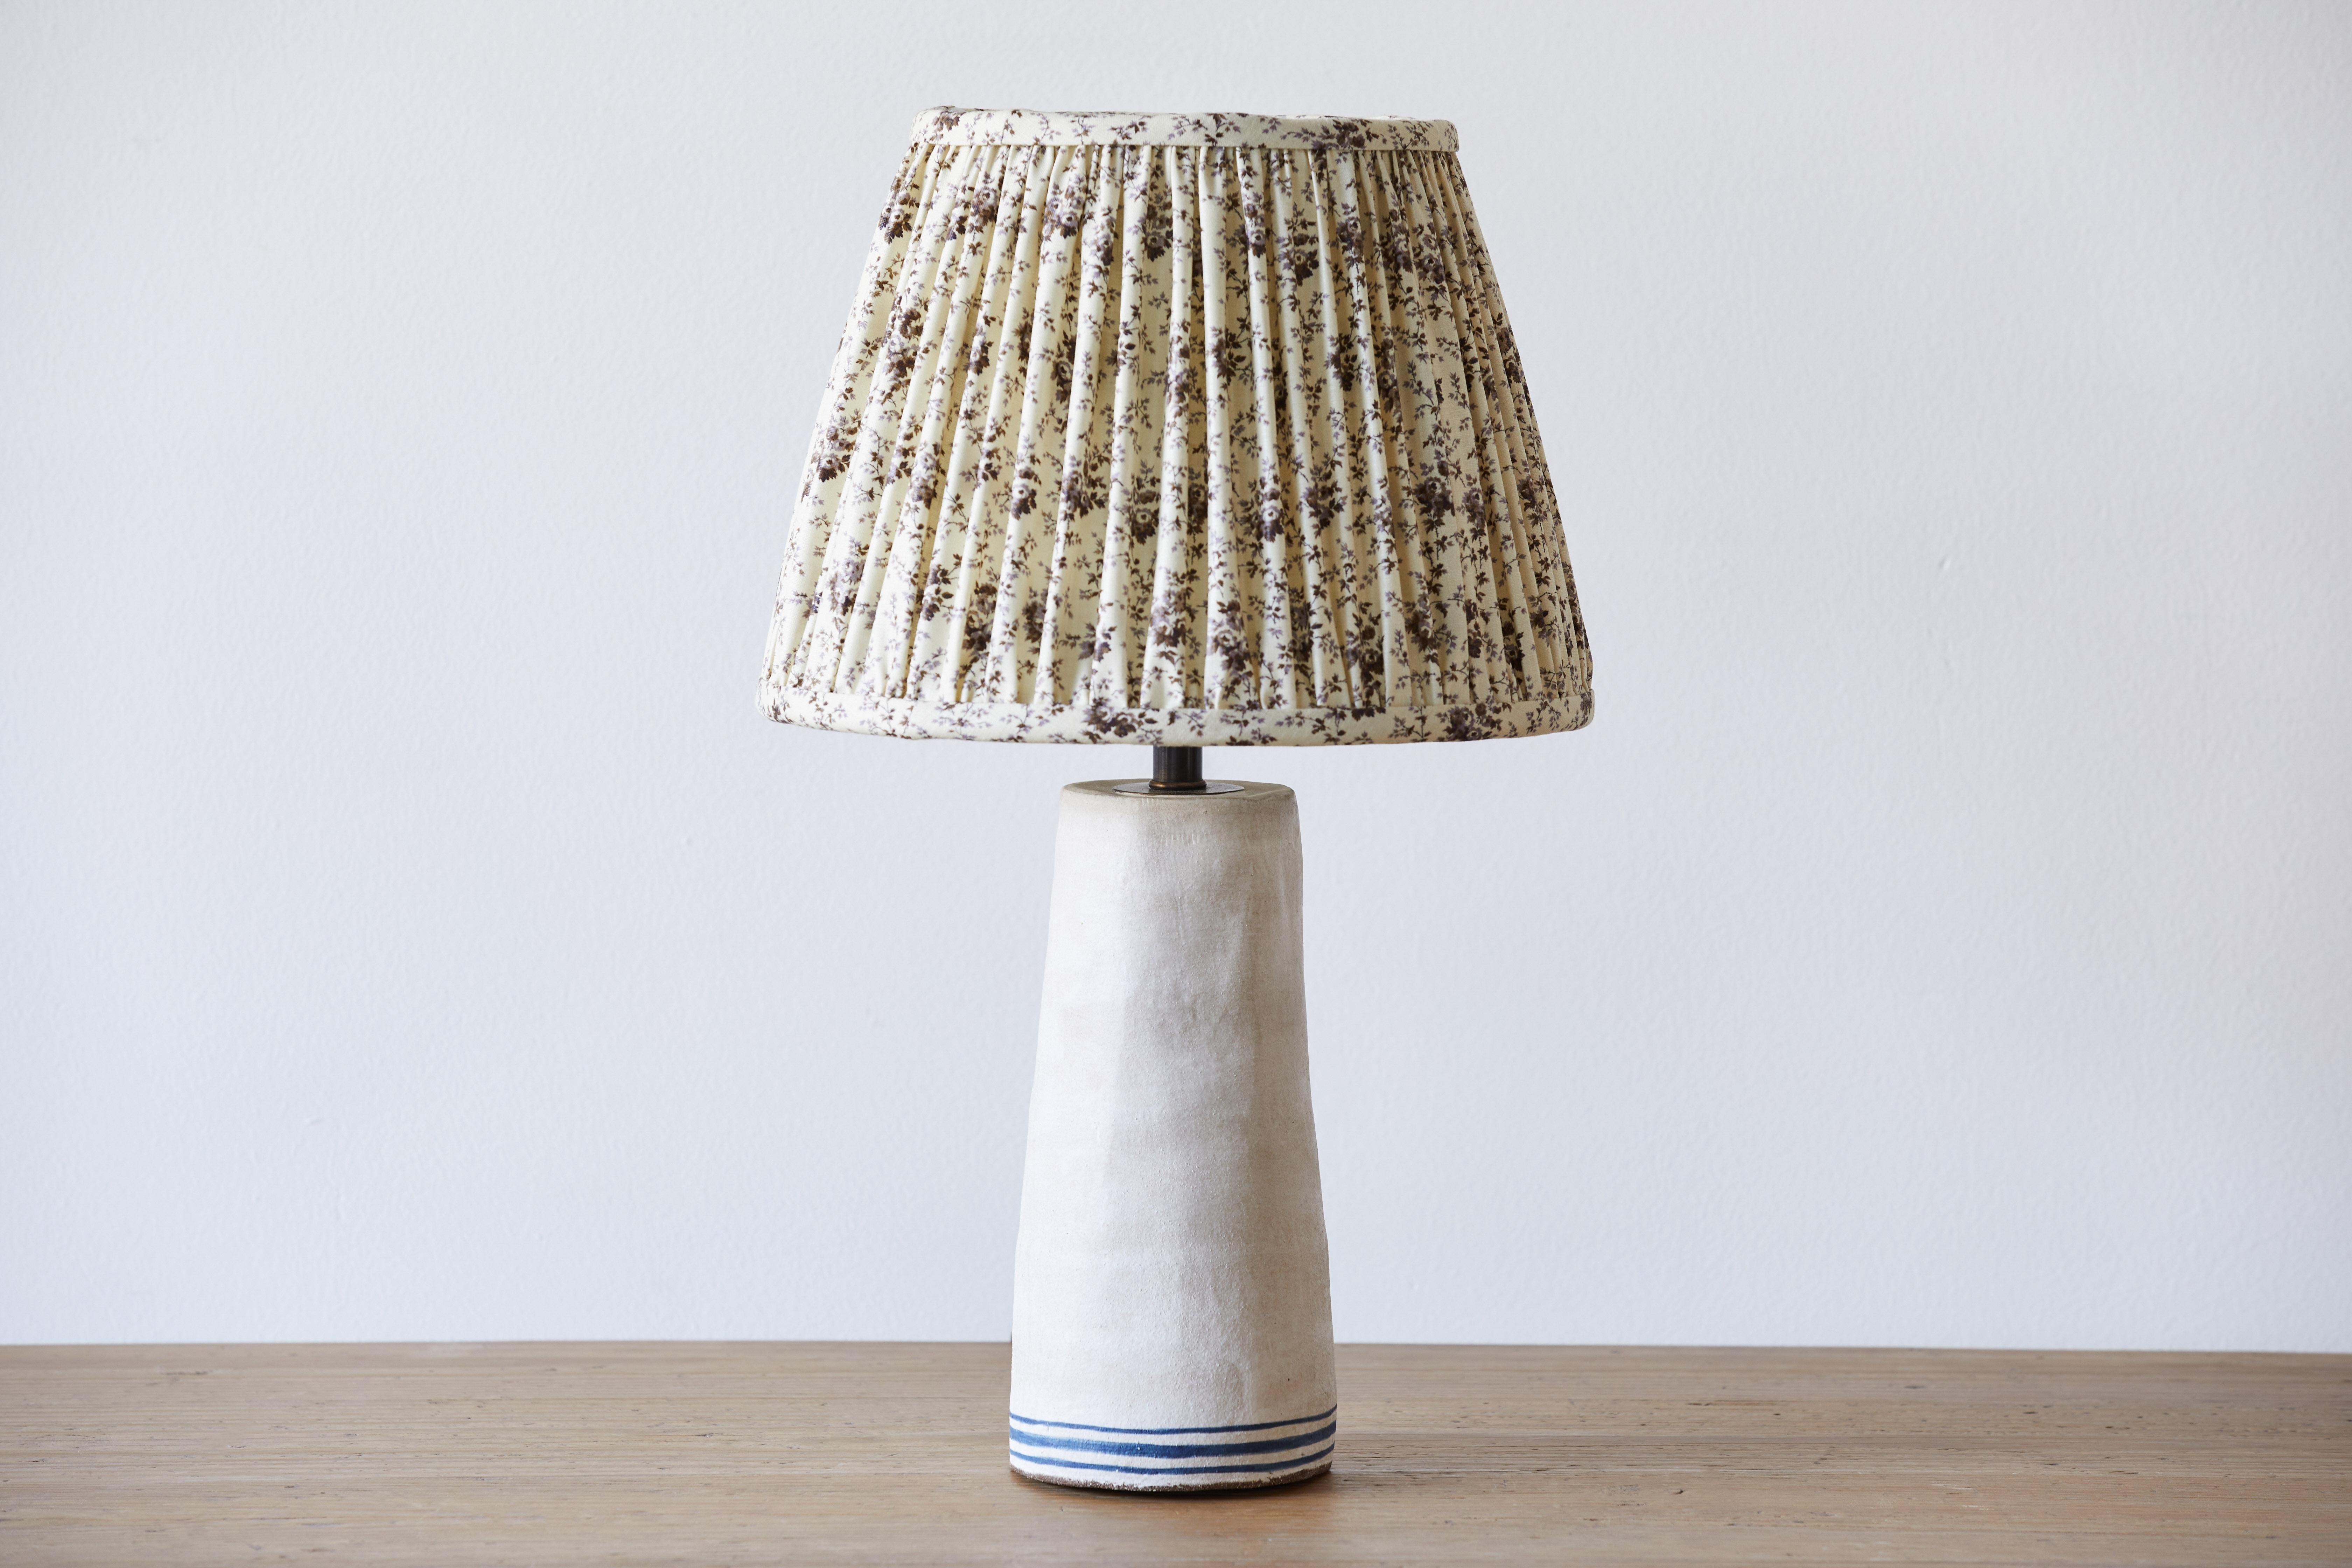 Alix Soubiran Palo table lamp with a custom shirred lampshade with Howe 36 Bourne Street Thimble print fabric.

Handmade ceramic lamp bases by the French American artist Alix Soubiran. The lamps come with brown twist cord.